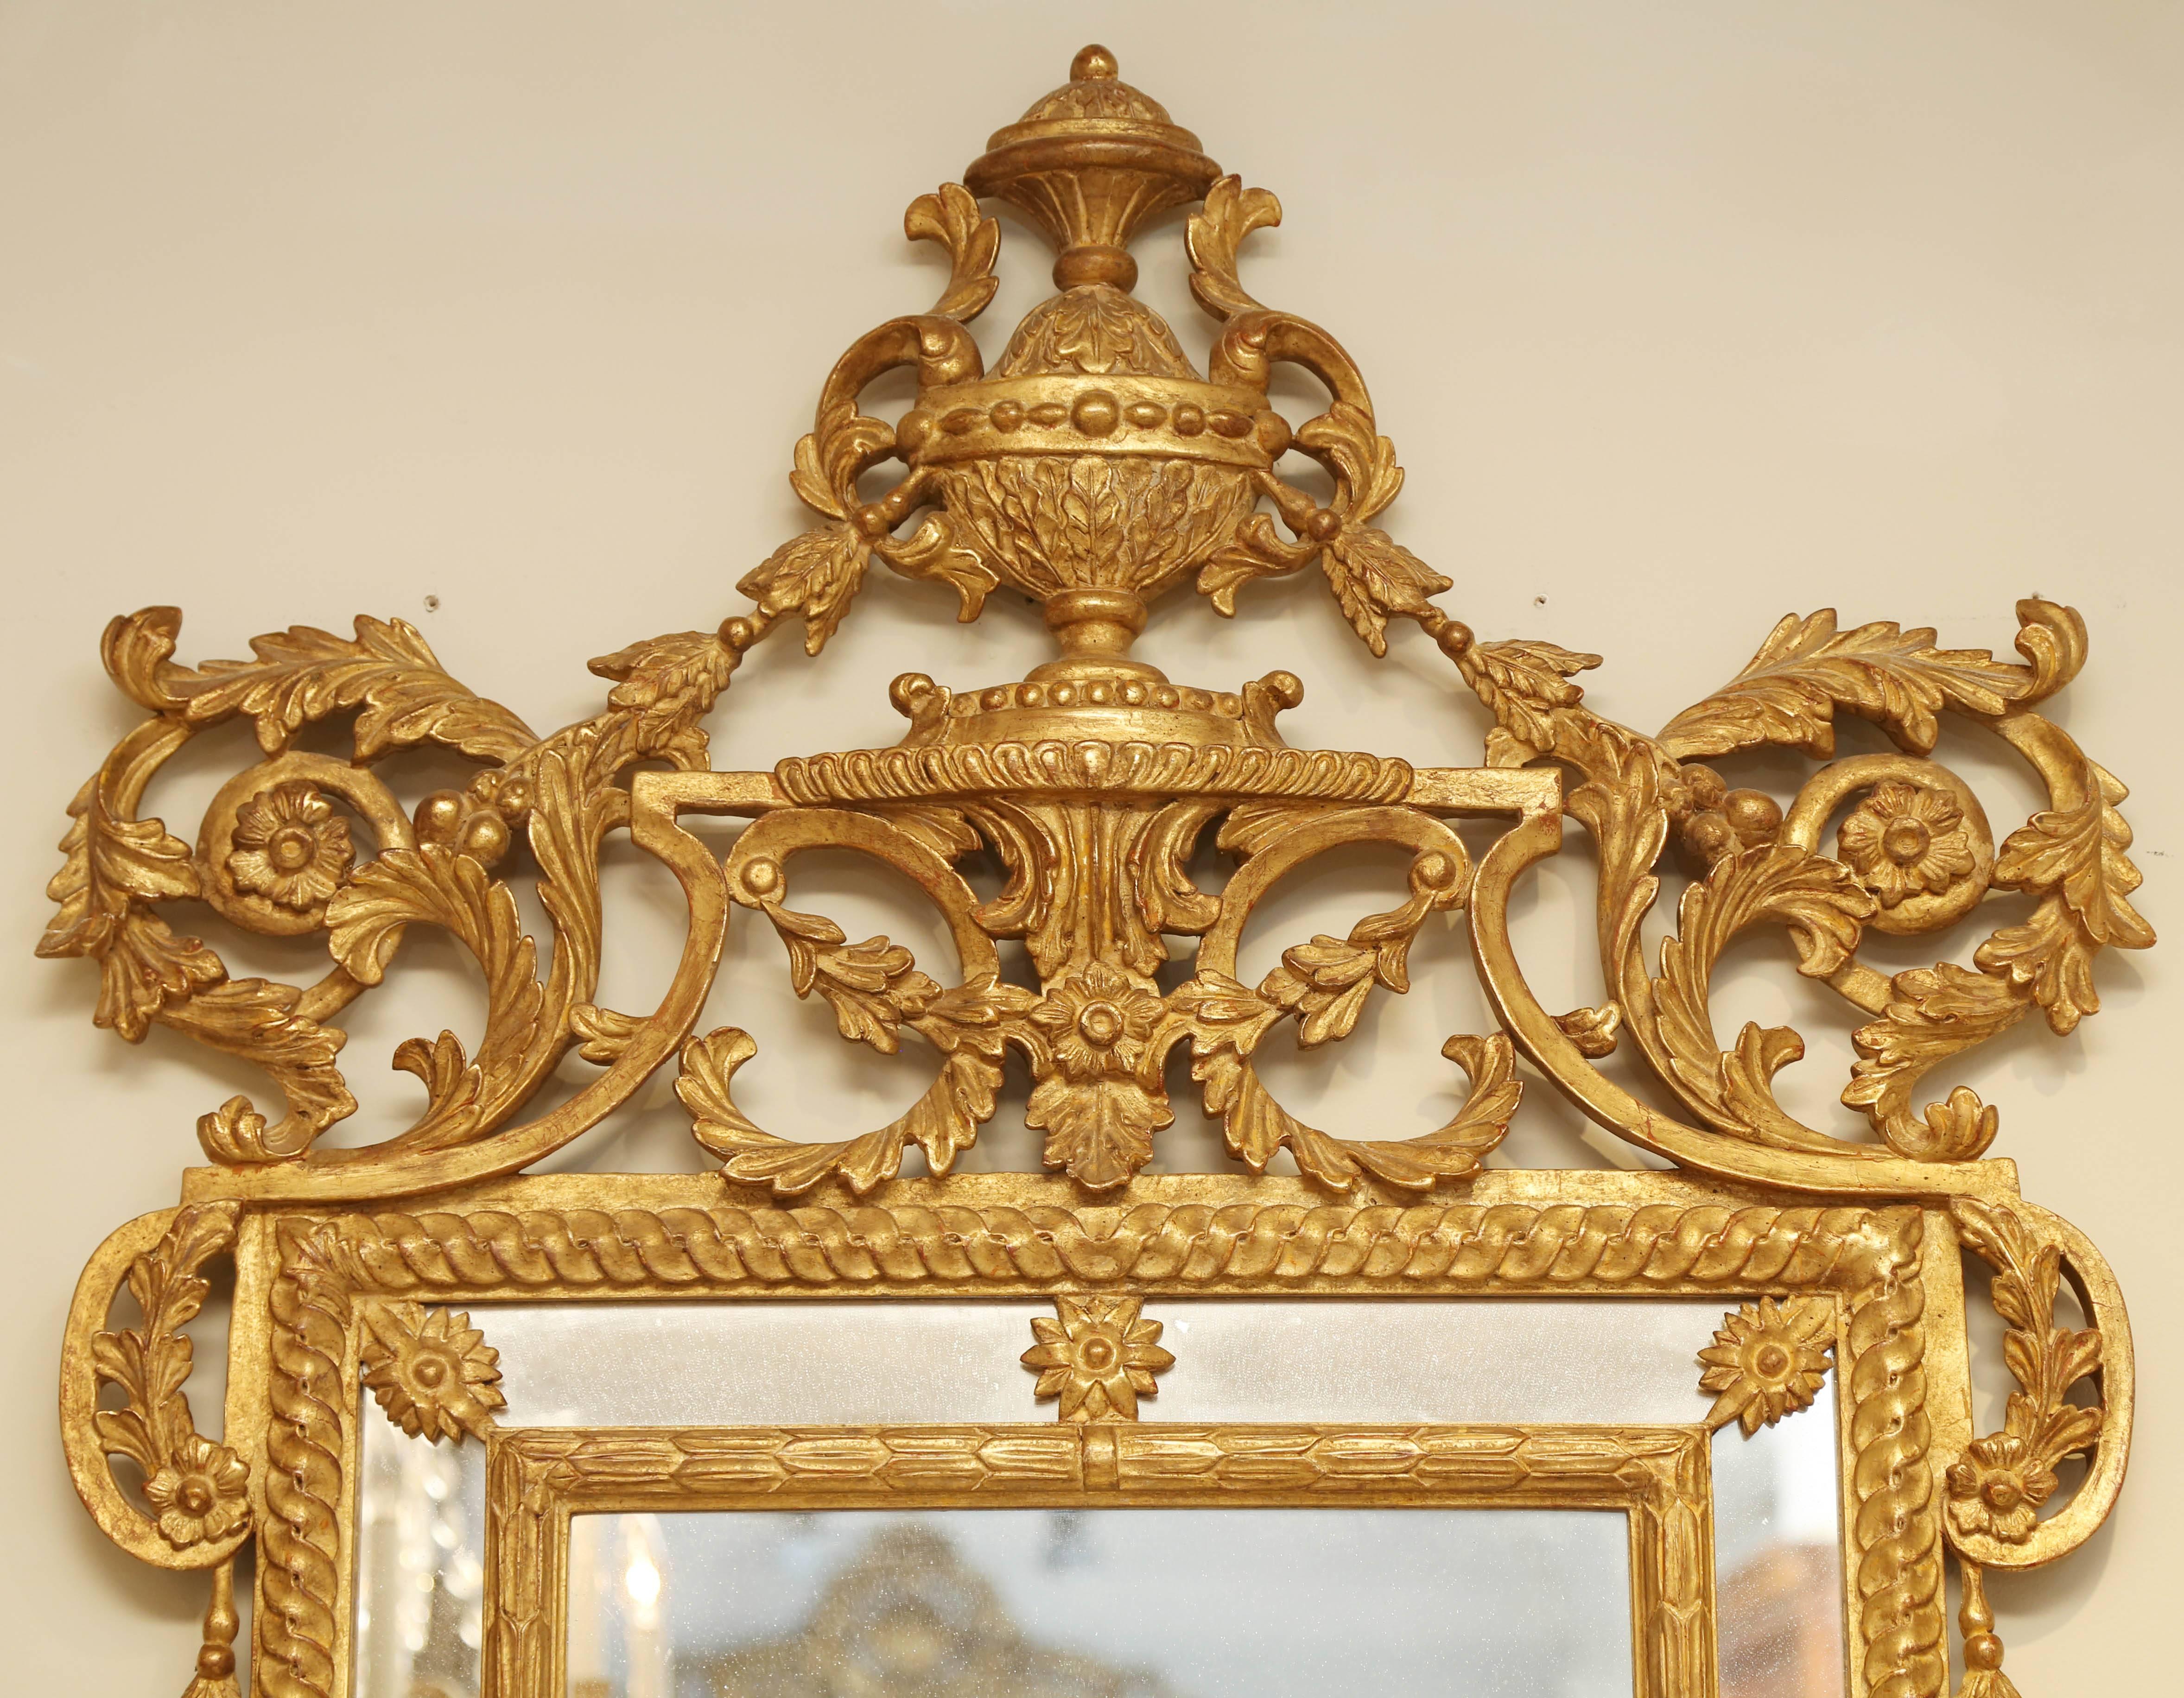 Pair of mirrors, in Louis XVI taste, of hand-carved giltwood, having an elaborate pierced scrolling pediment, centred with an urn, its rectangular frame with mirrored relief, decorated by rosettes, and draped with husking.

Stock ID: D4895